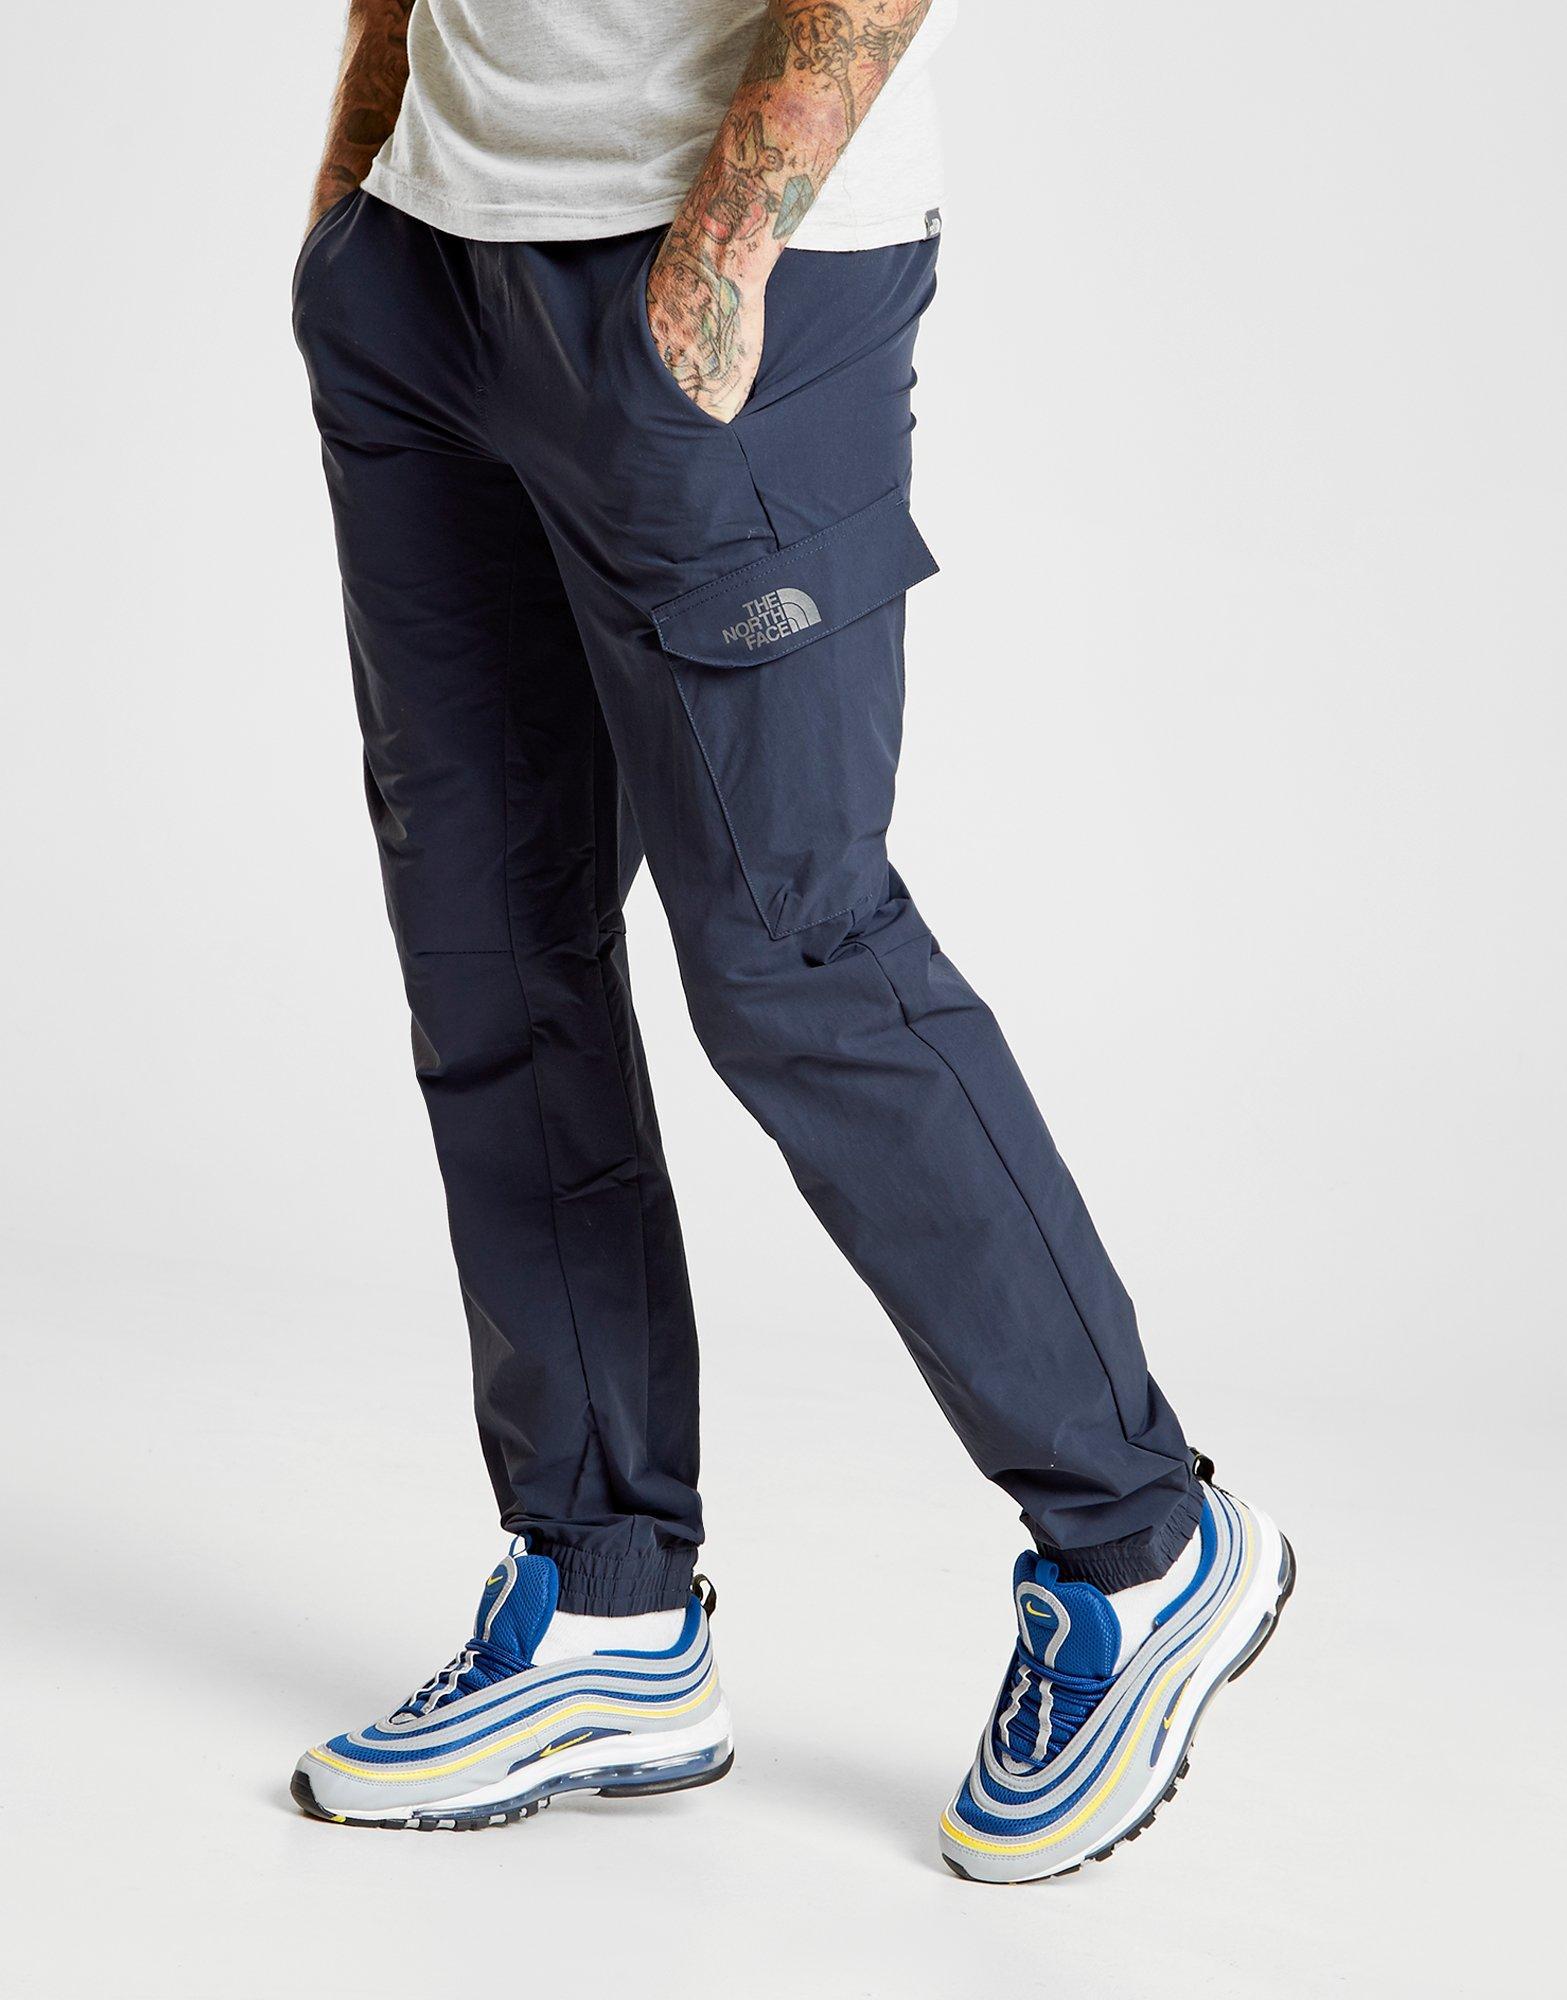 The North Face Synthetic Ventacious Urban Cargo Pants in Navy/Grey